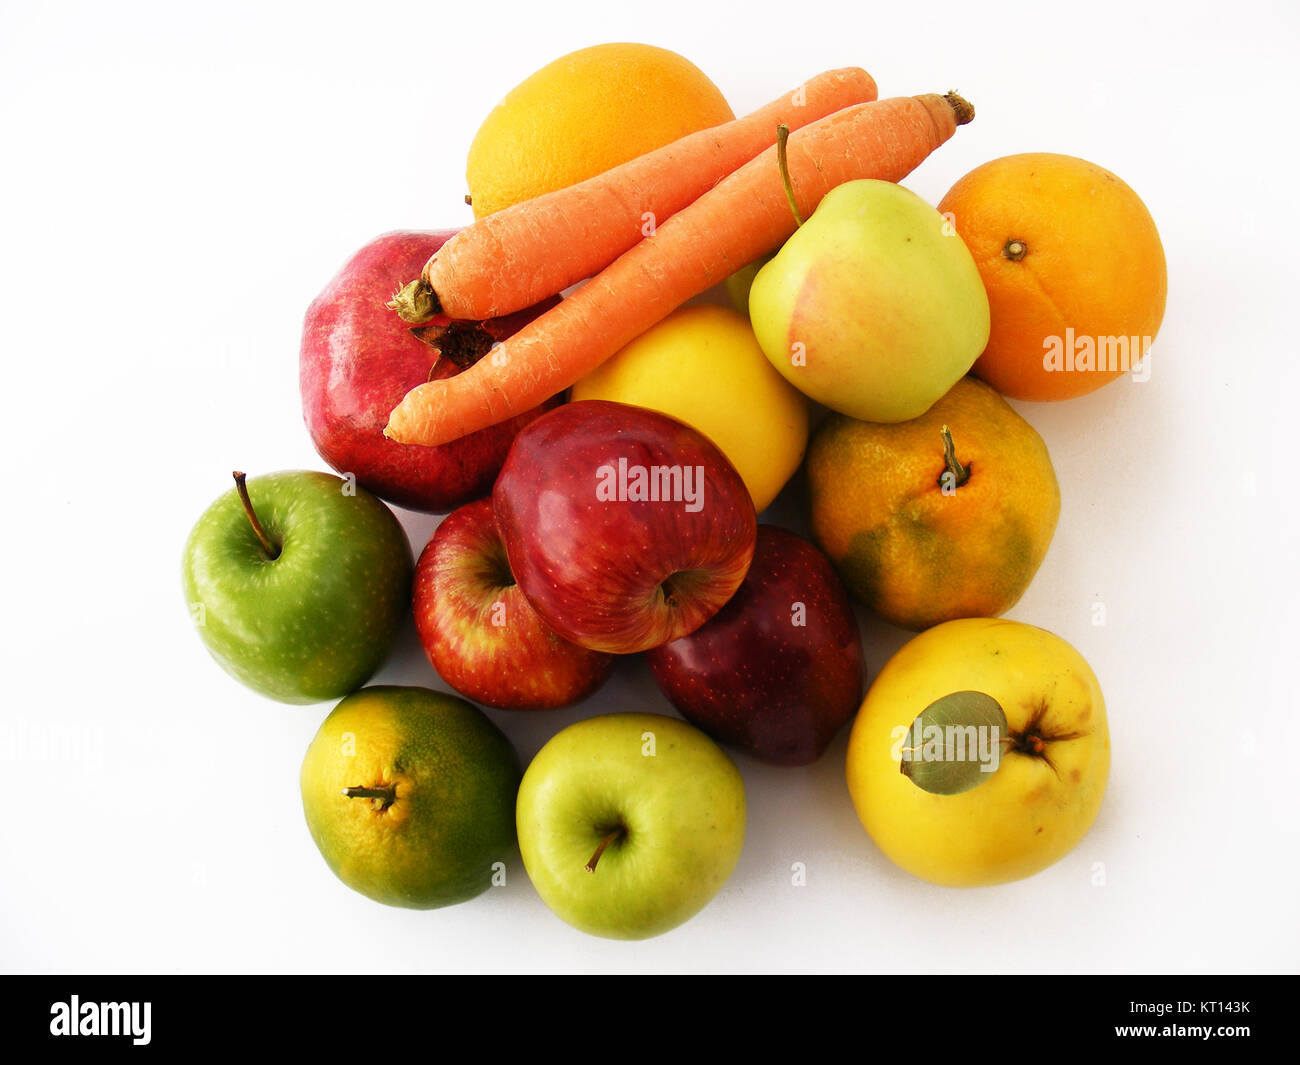 Fruit pictures Stock Photo